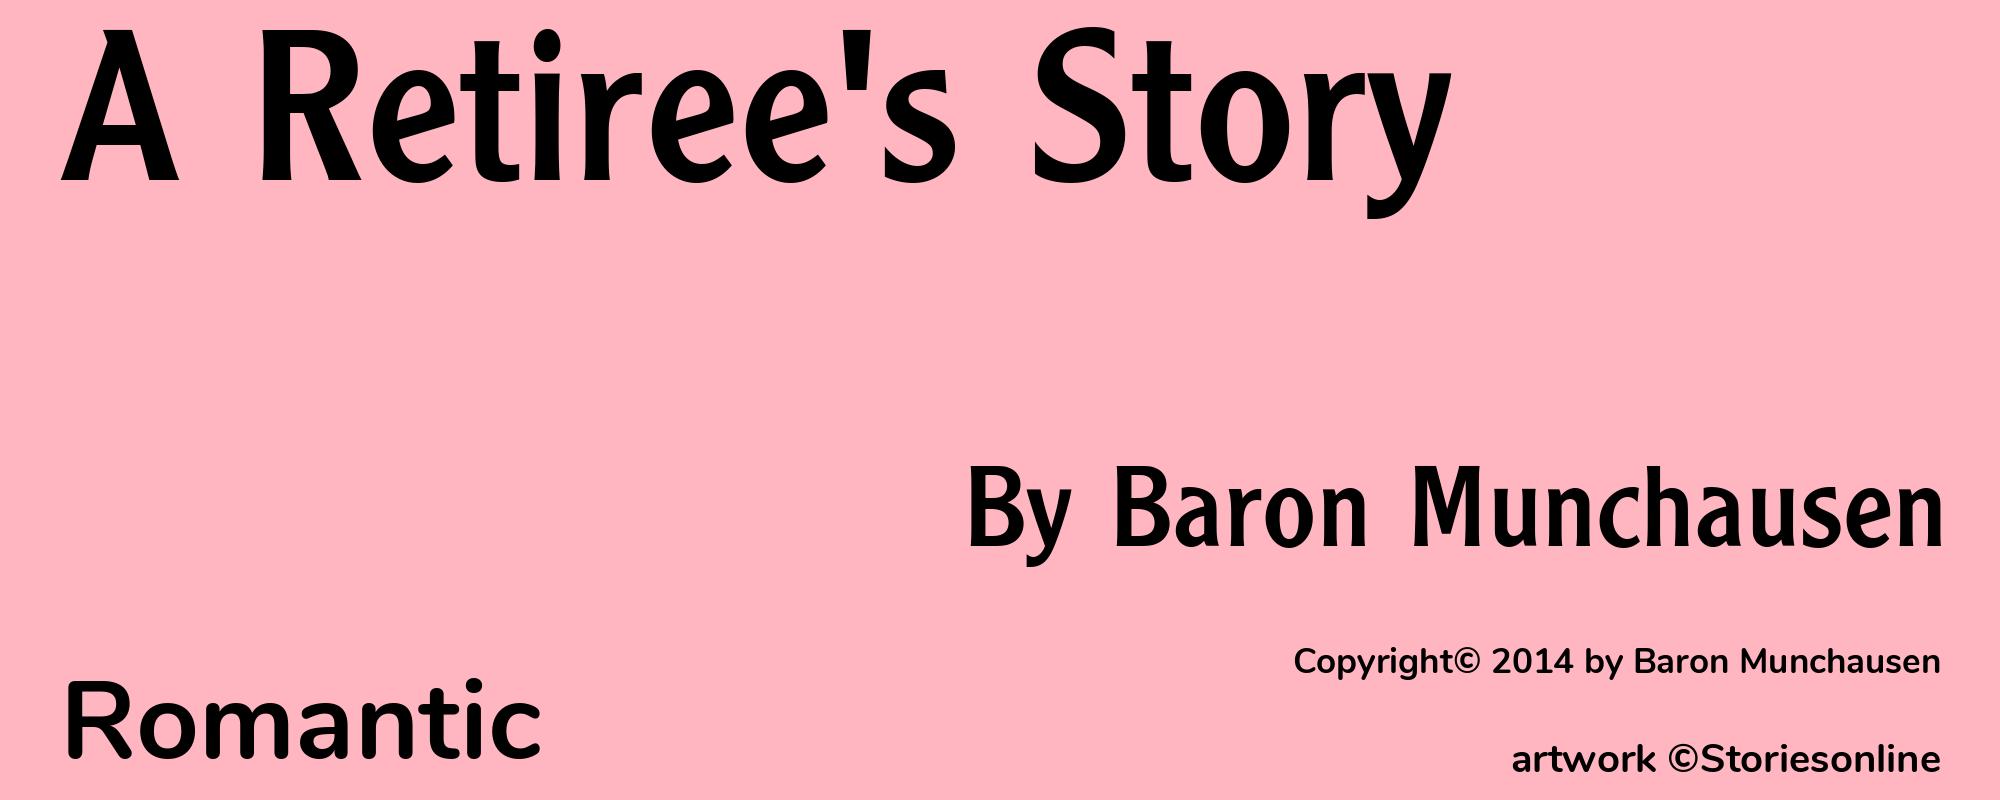 A Retiree's Story - Cover